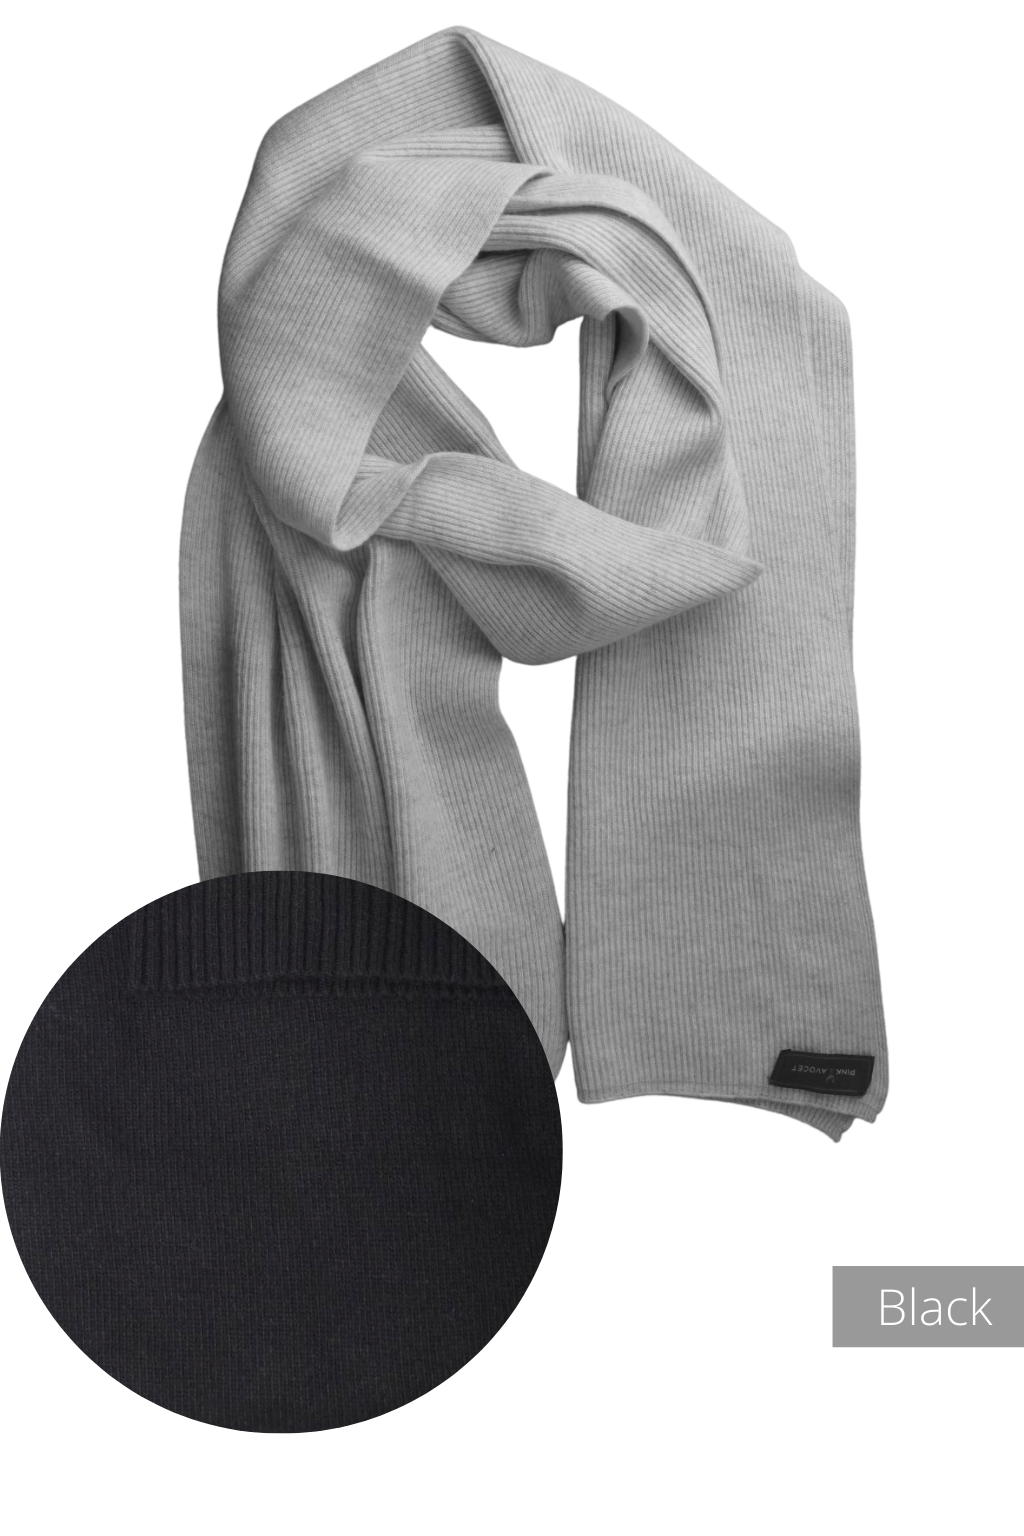 Cashmere Ribbed Scarf Black / One Size by Pink Avocet